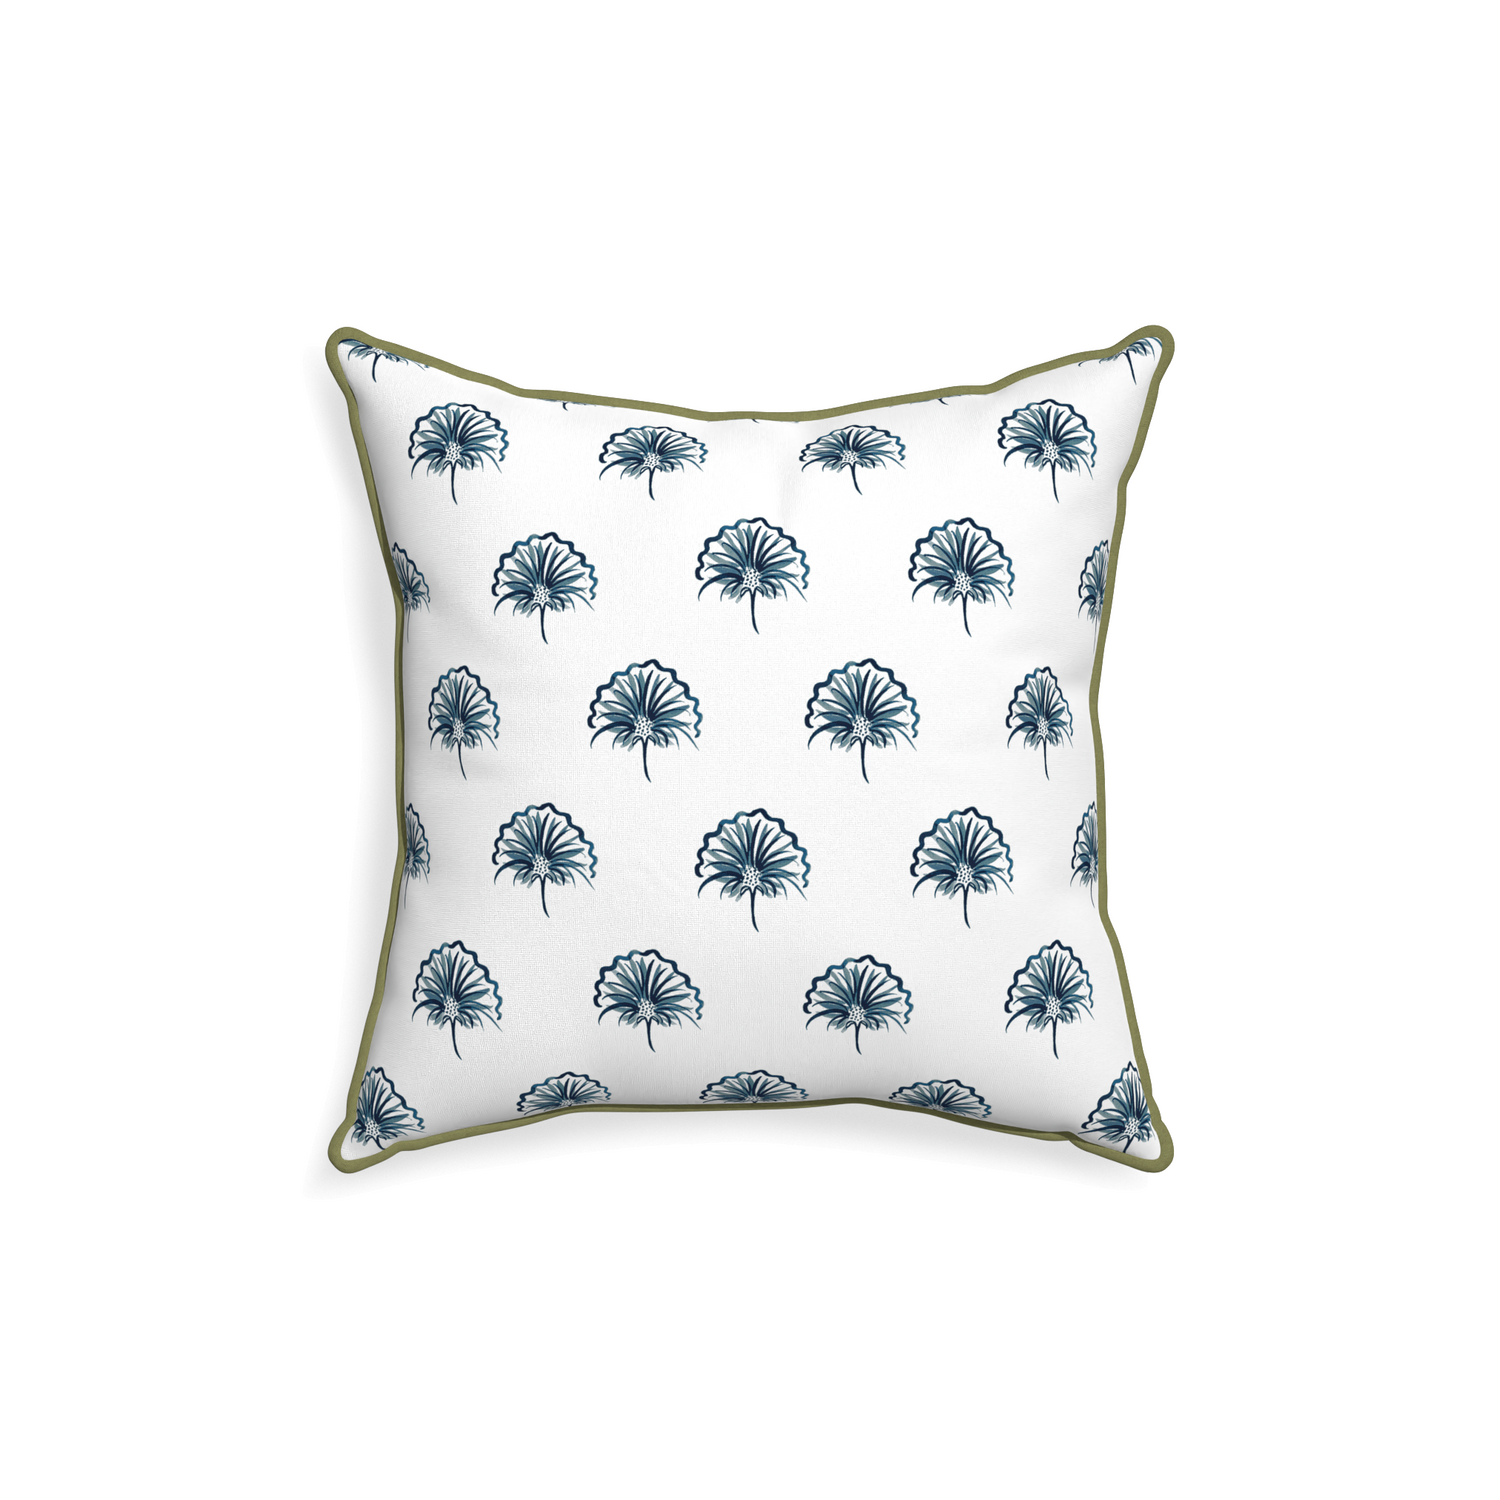 18-square penelope midnight custom pillow with moss piping on white background